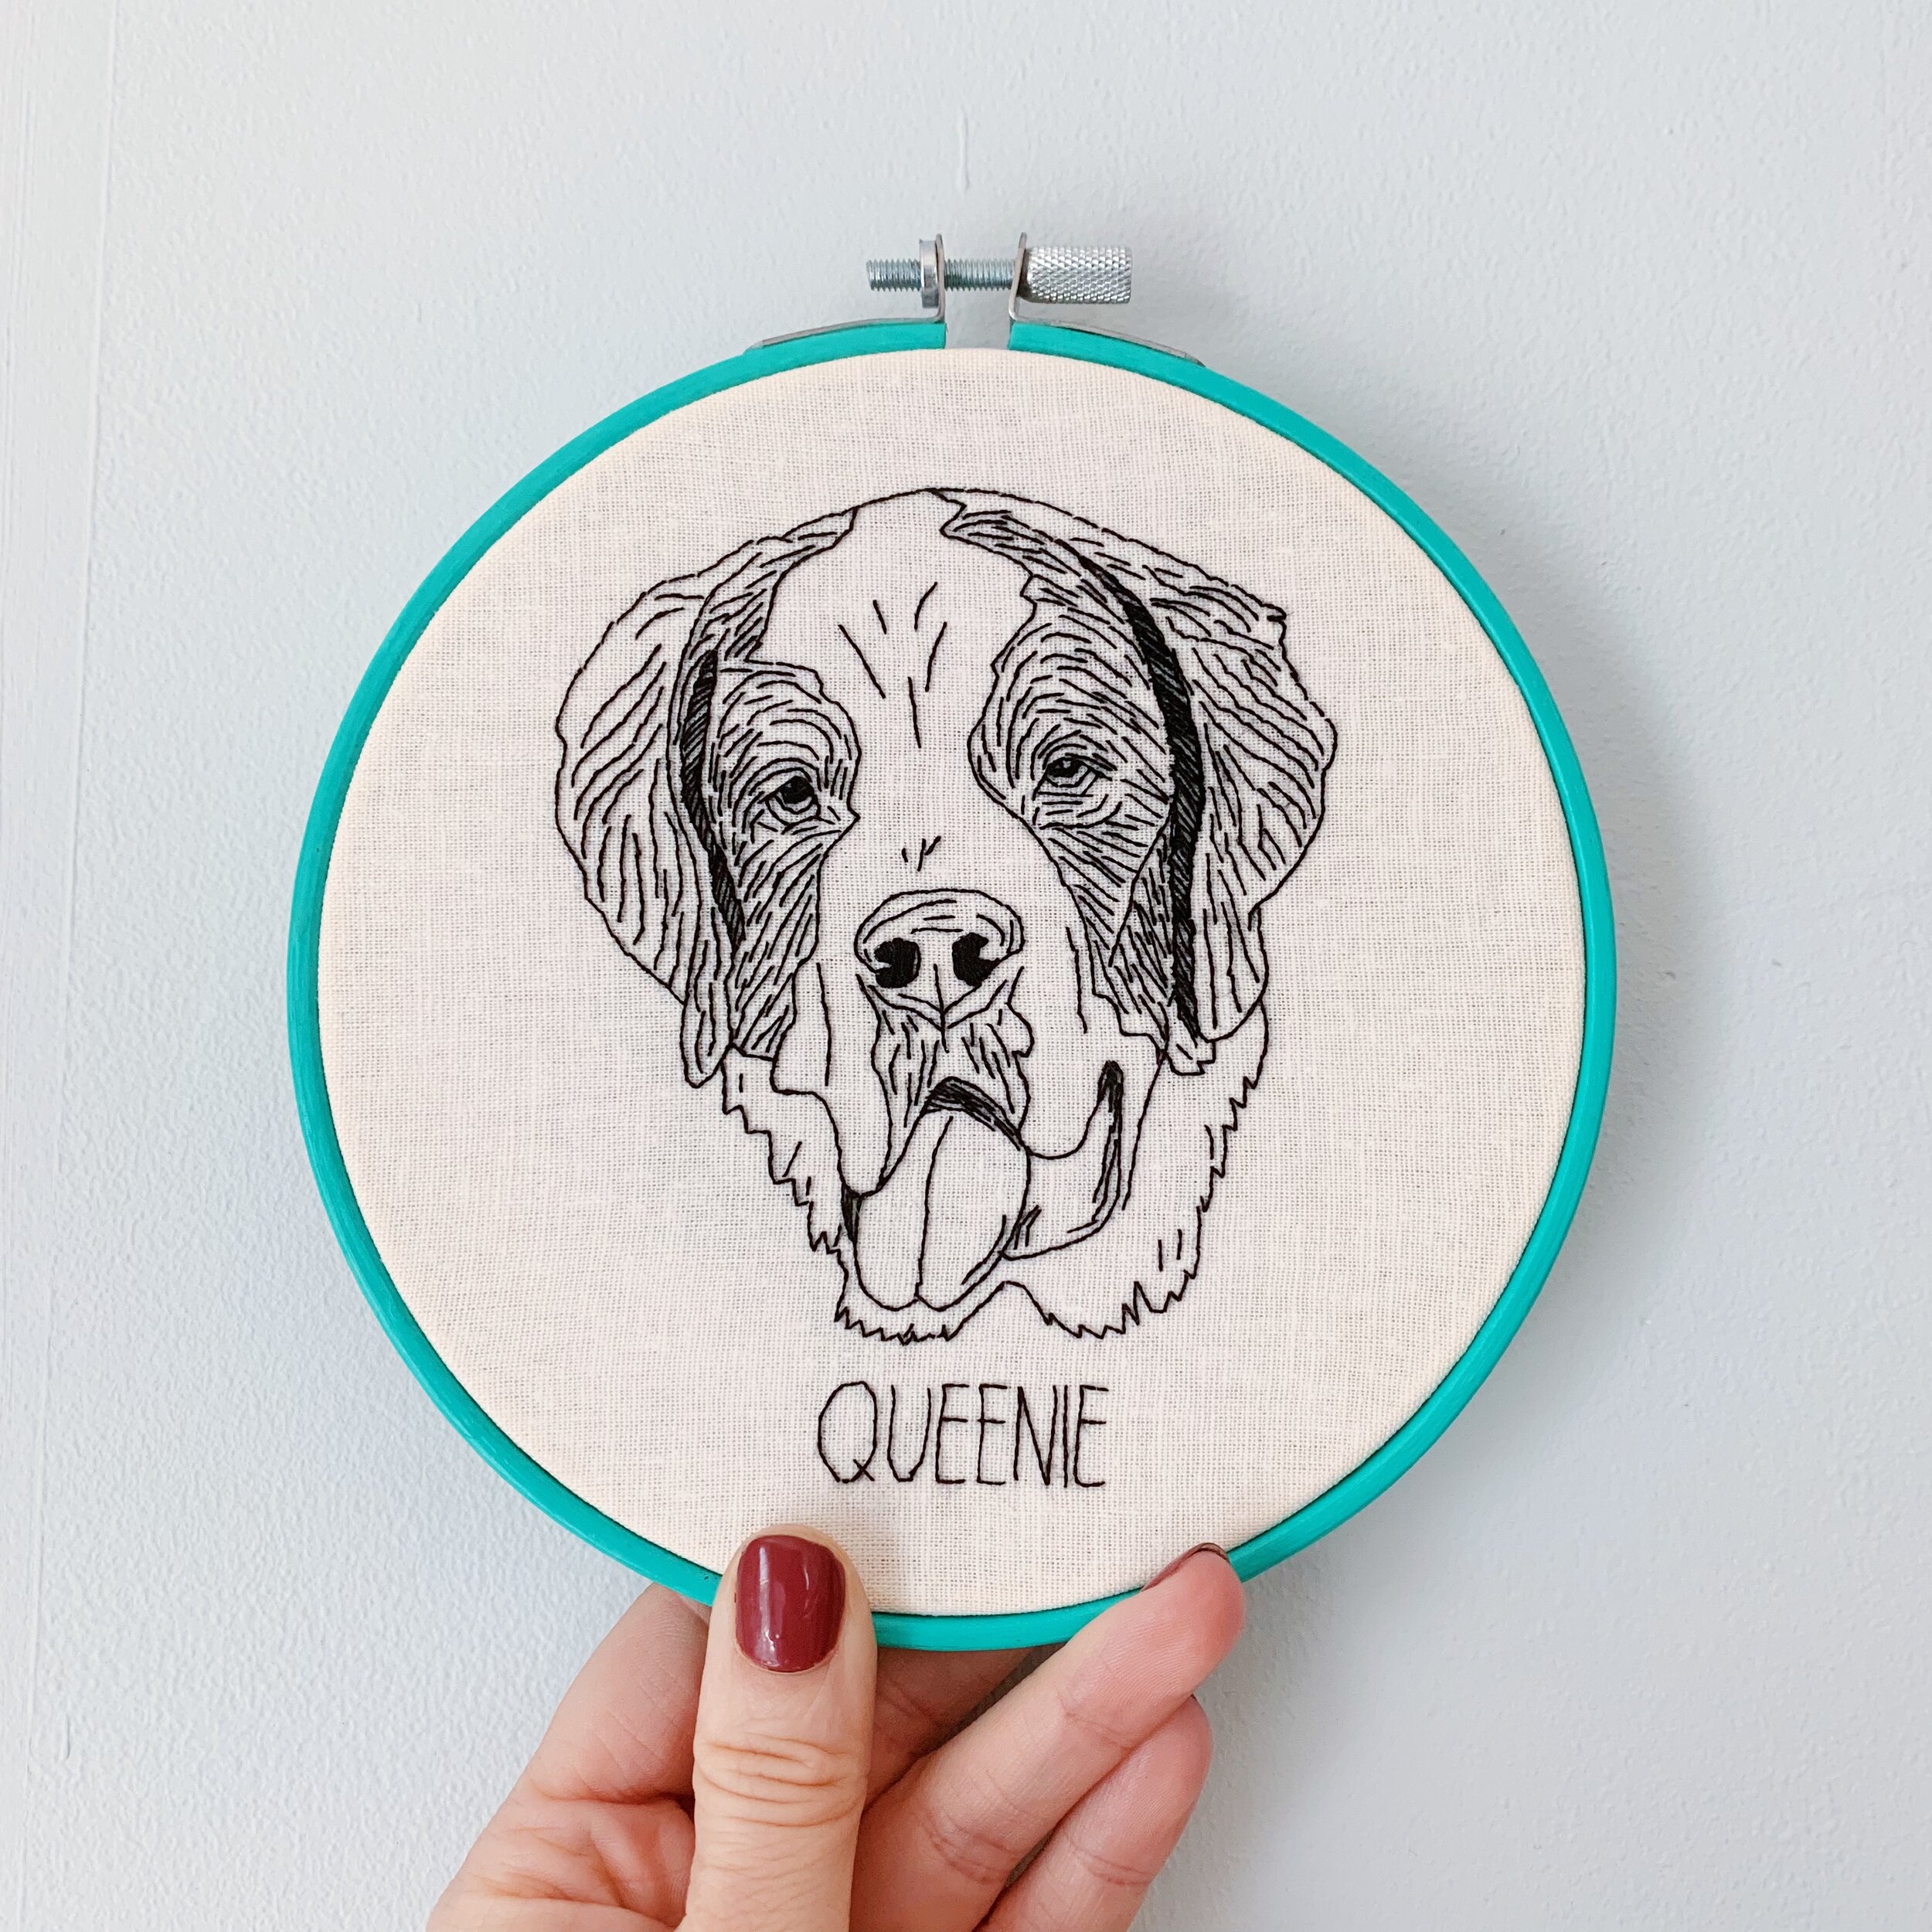 6" Line portrait with painted hoop